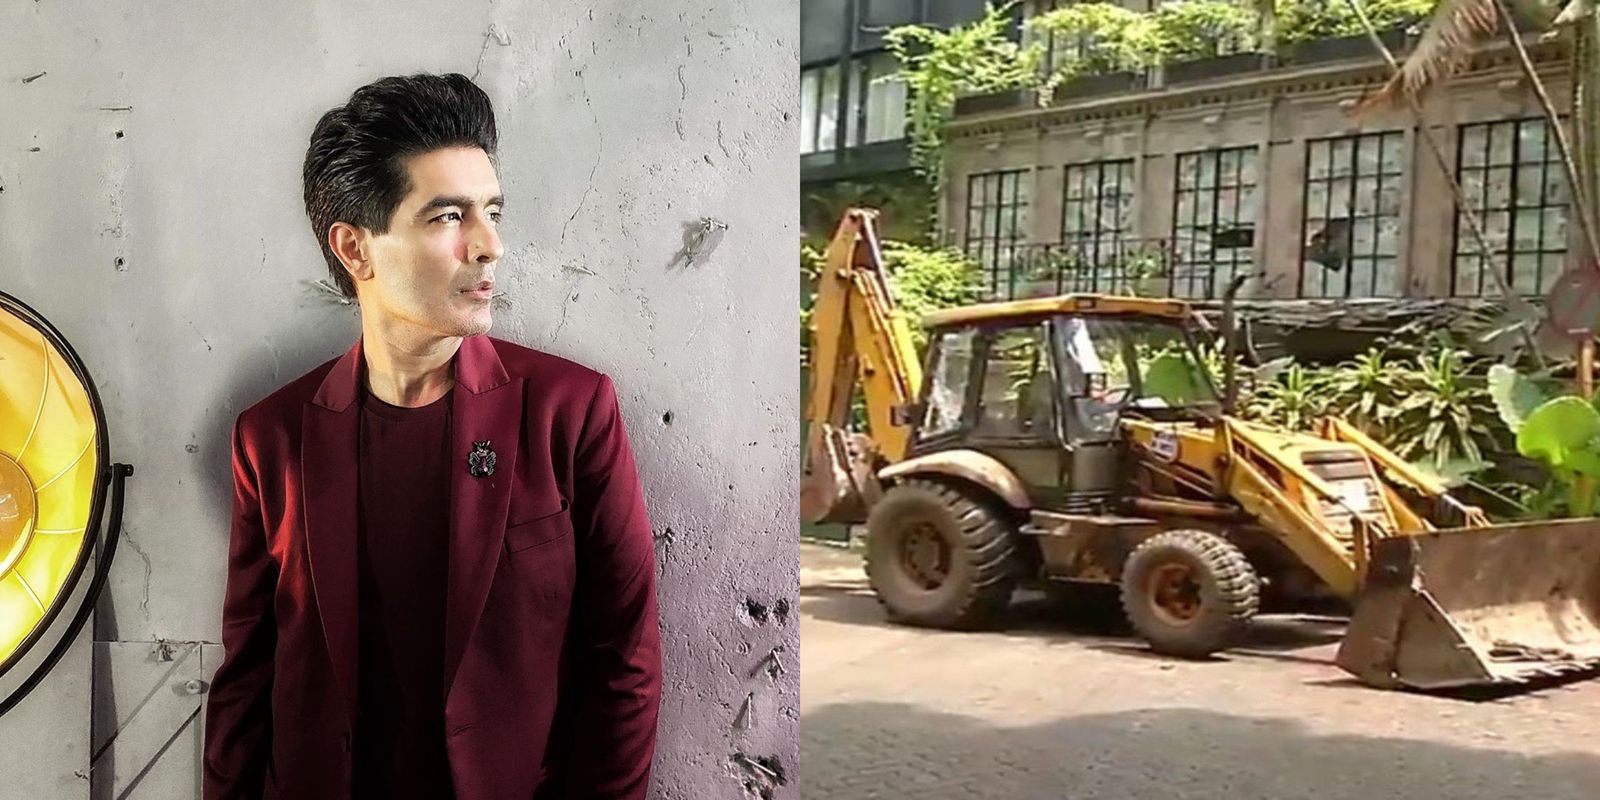 Manish Malhotra Unlike Kangana Given 7 Days To Respond To BMC As His Property Also Gets Flagged For Illegal Construction